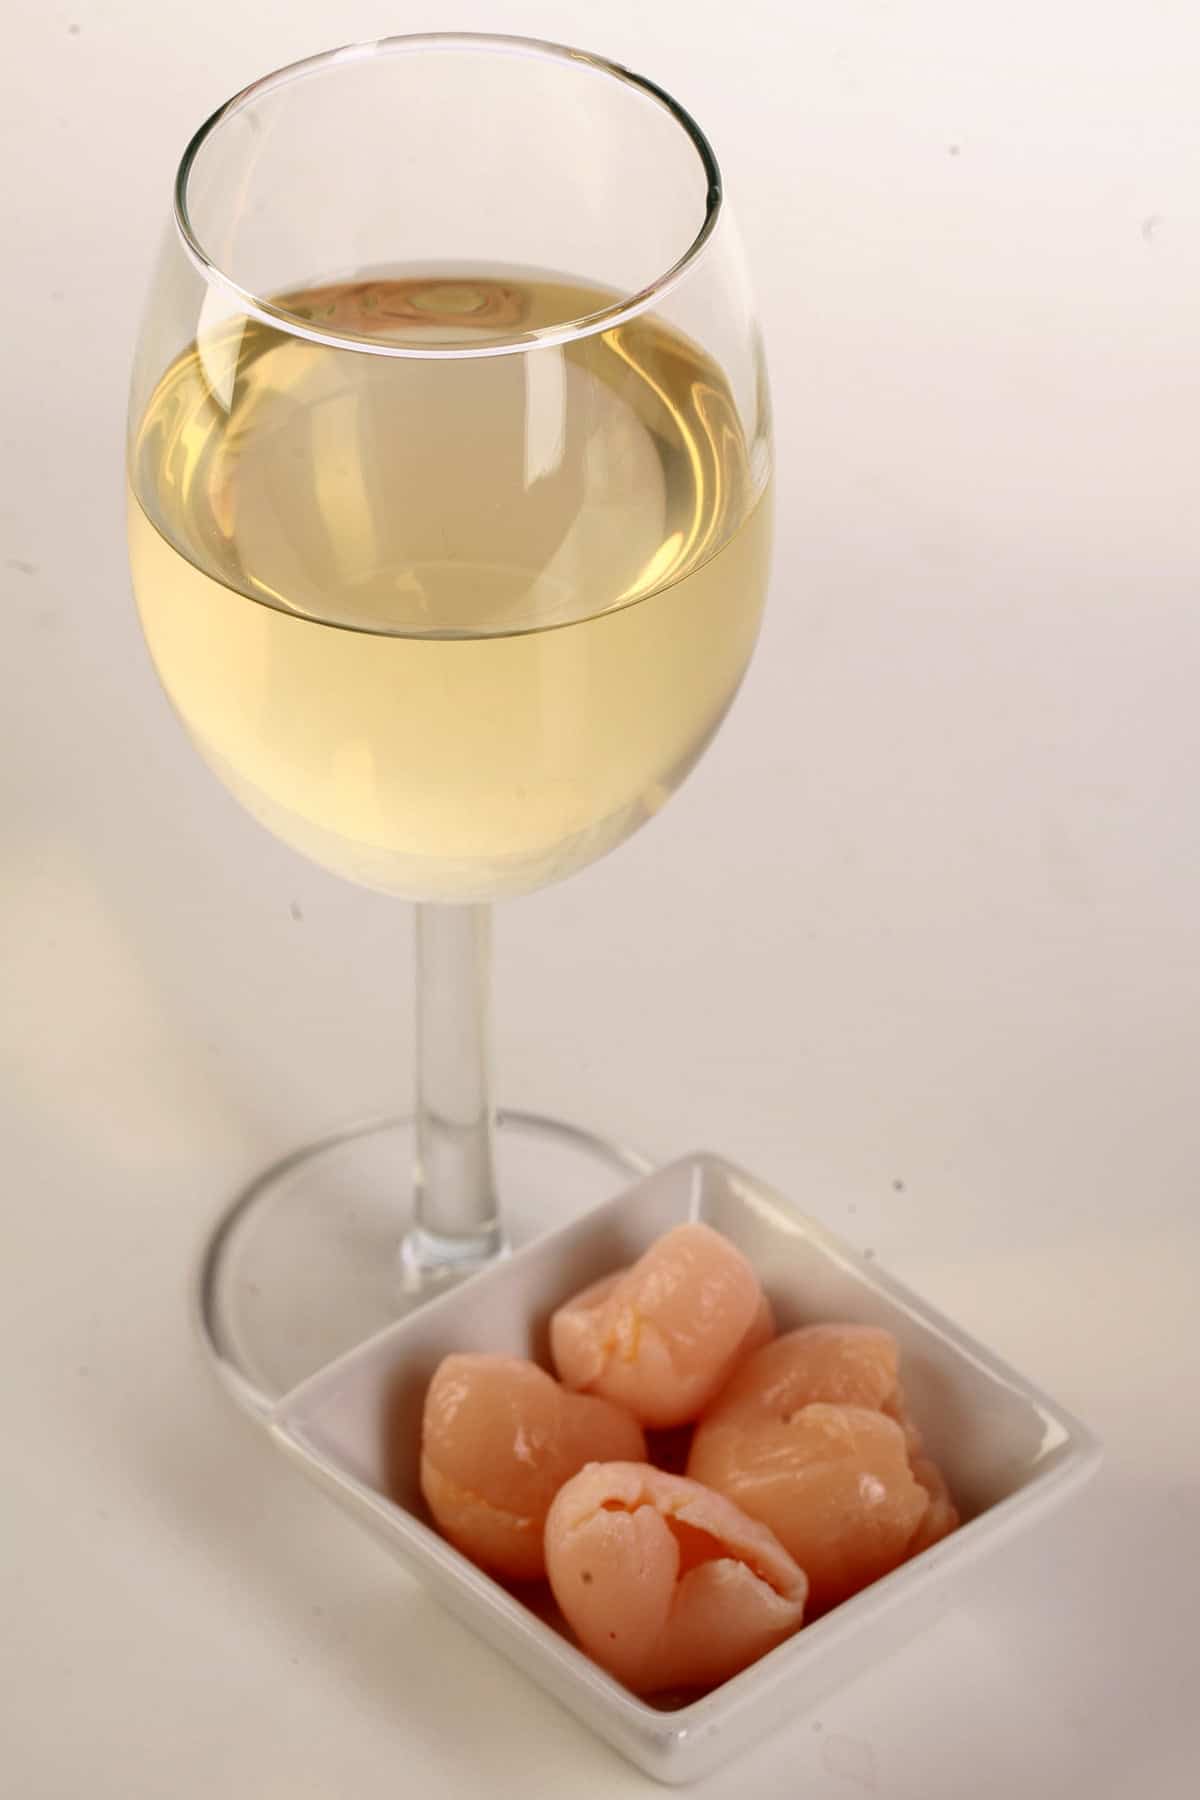 A glass of white wine - made from this lychee wine recipe - is pictured next to a small bowl of lychee fruit.